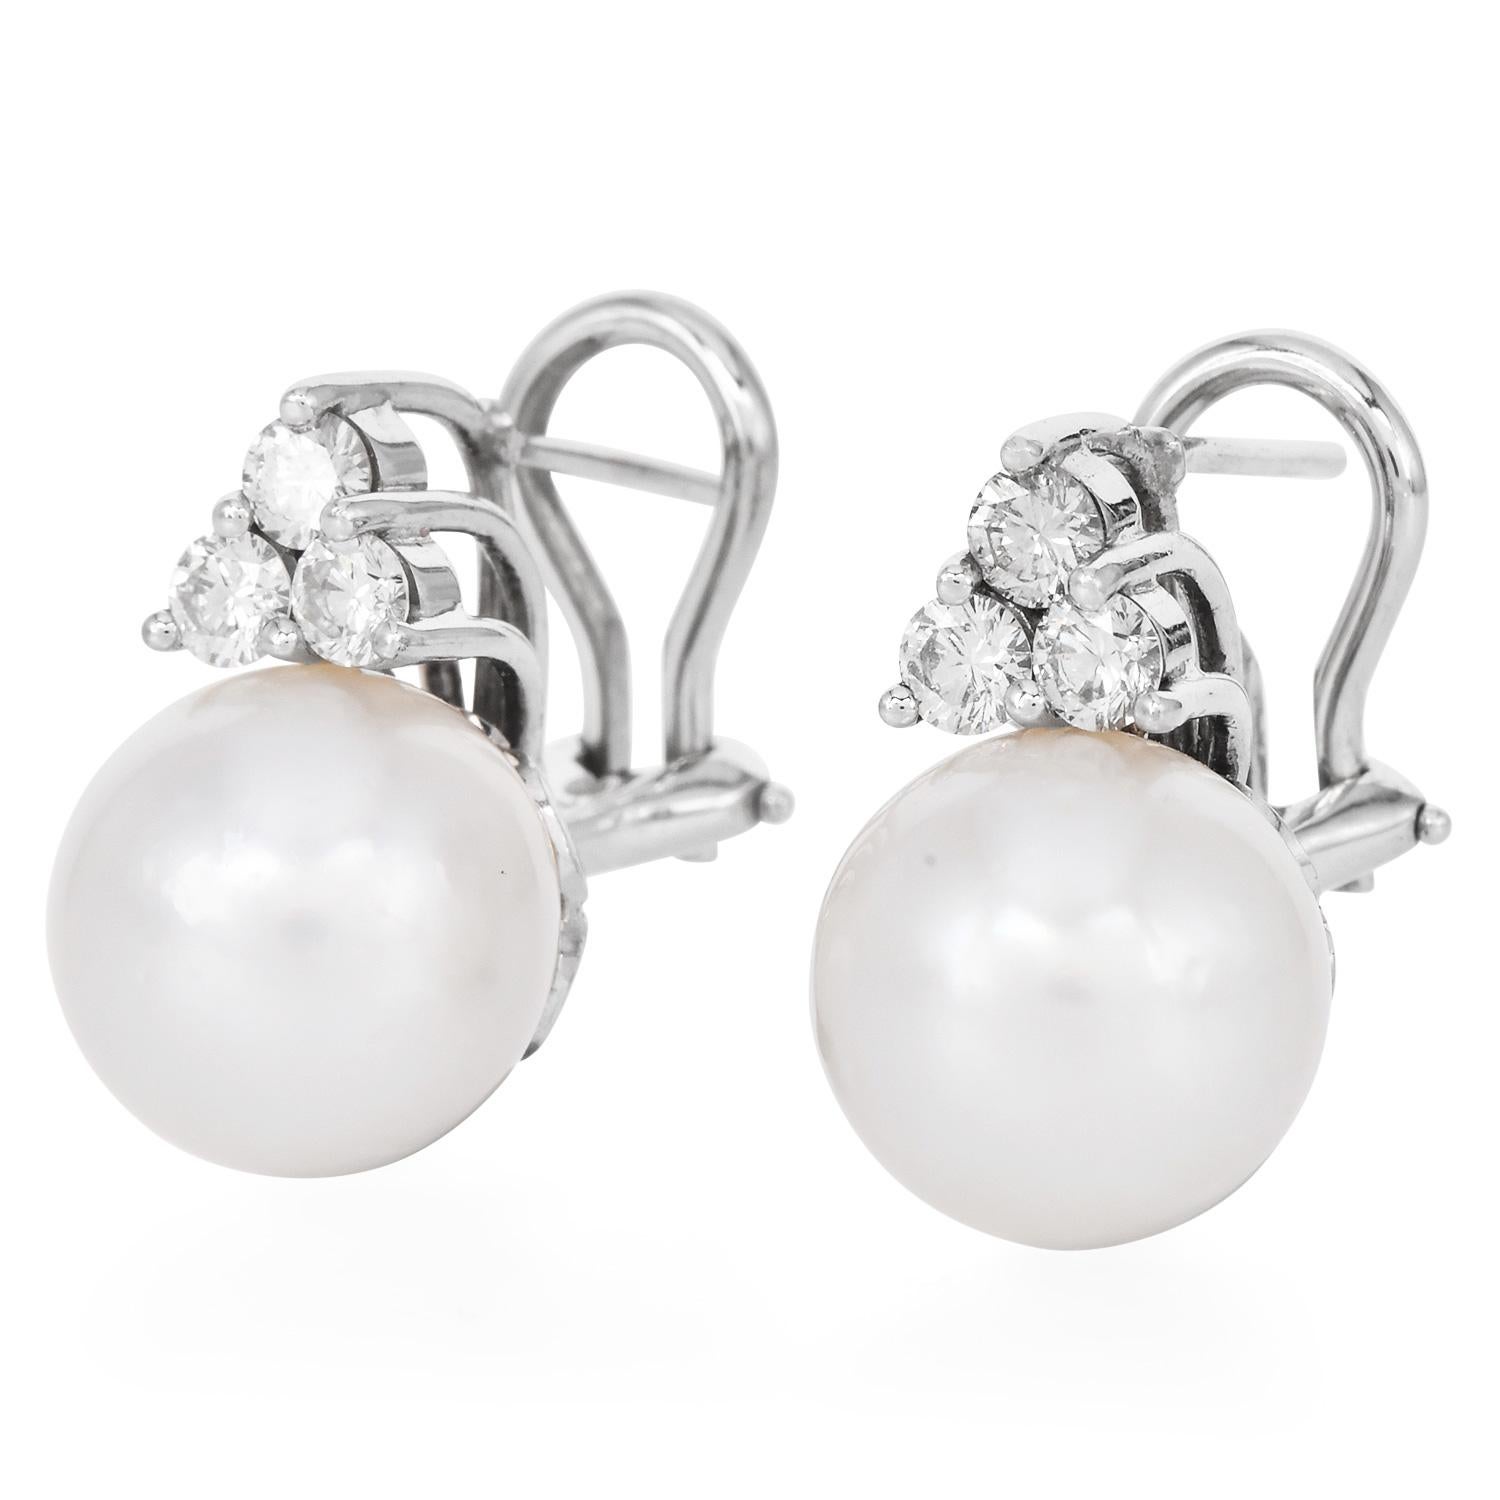 
Crafted in solid 18K white gold, they have 2 Fine genuine cultured Pearls, 11 mm, perfectly round with white-silver undertones, high luster & minimum blemishes.
Topped by (6) round-cut, Well-matched extra white fiery Diamonds weighing approximately